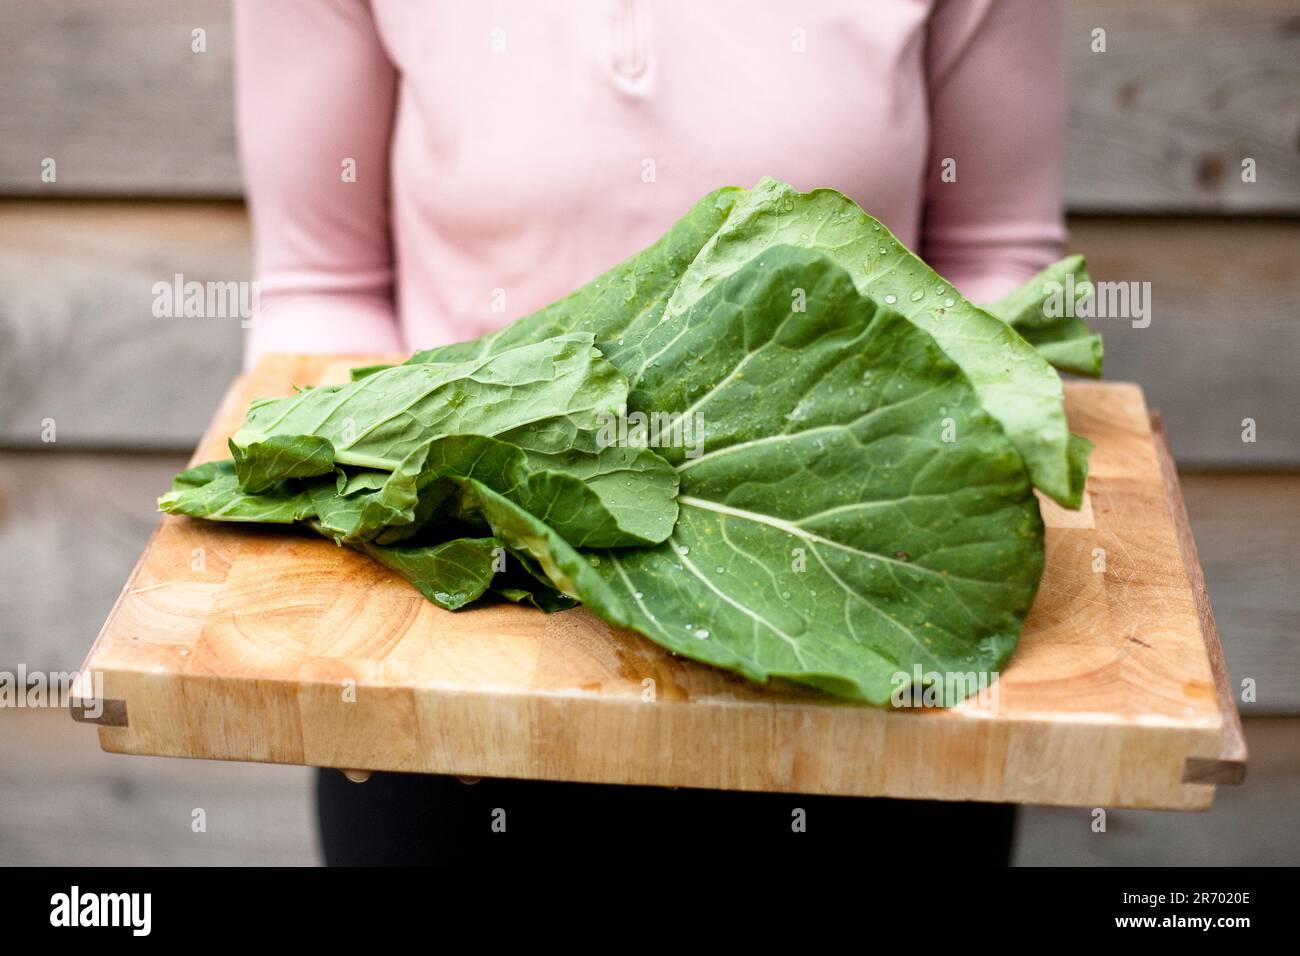 https://c8.alamy.com/comp/2R7020E/a-young-woman-holds-a-wooden-cutting-board-laden-with-organic-collard-greens-from-her-garden-in-seattle-washington-2R7020E.jpg